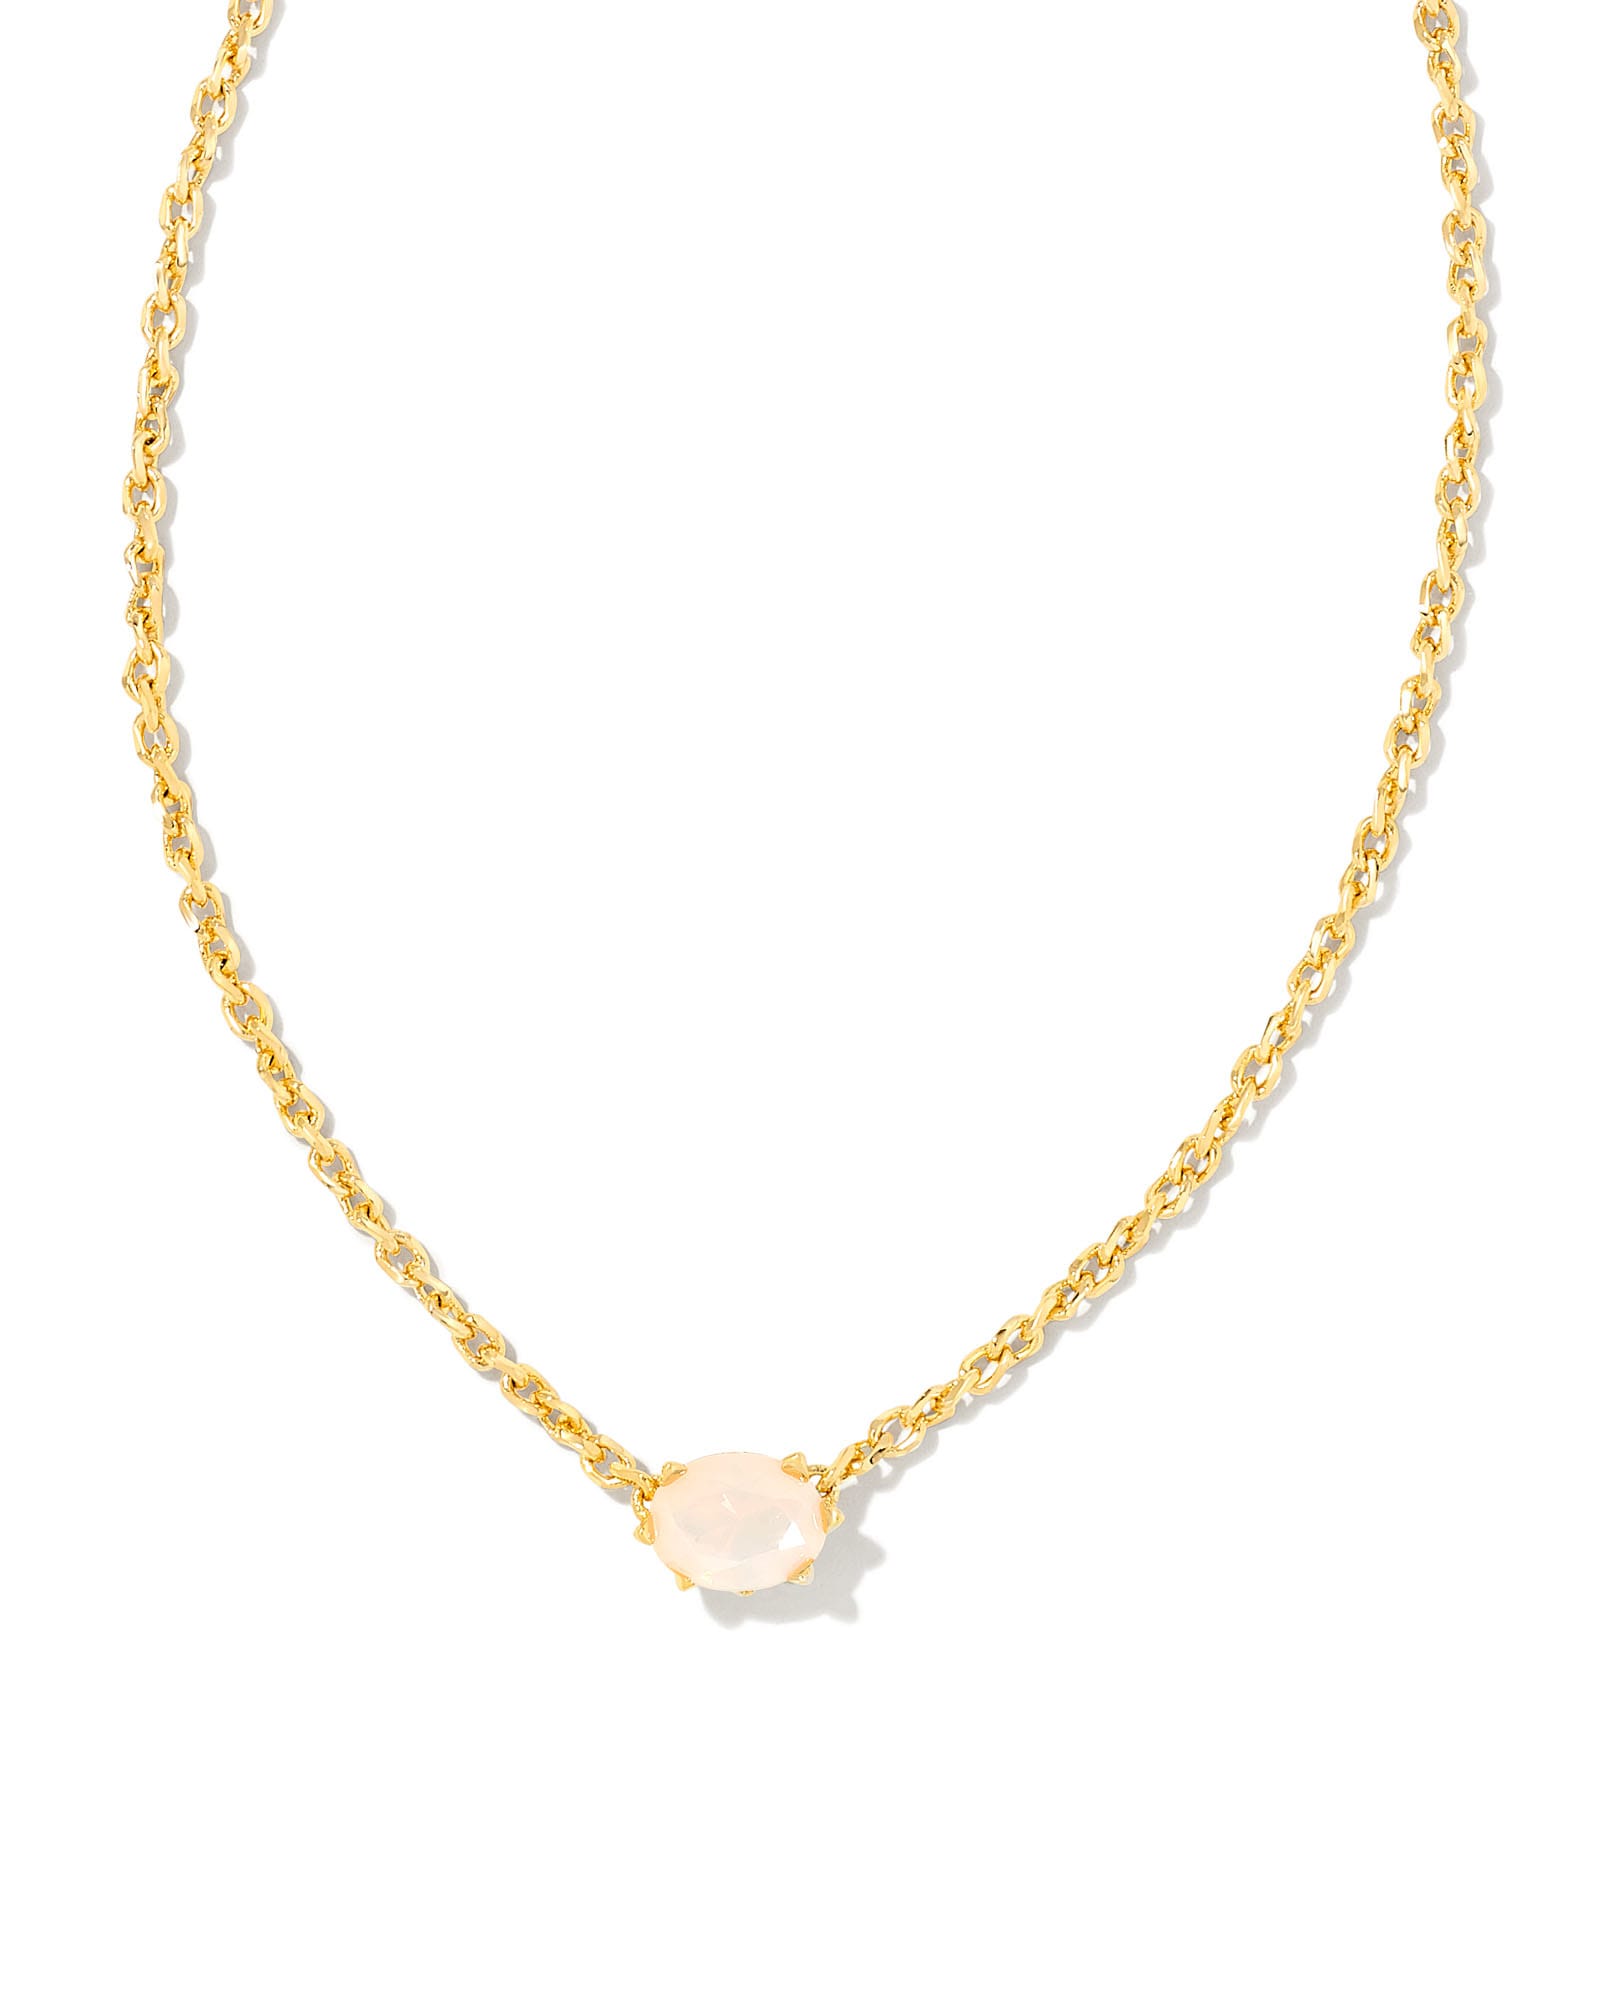 Cailin Gold Pendant Necklace in Champagne Opal Crystal (October)